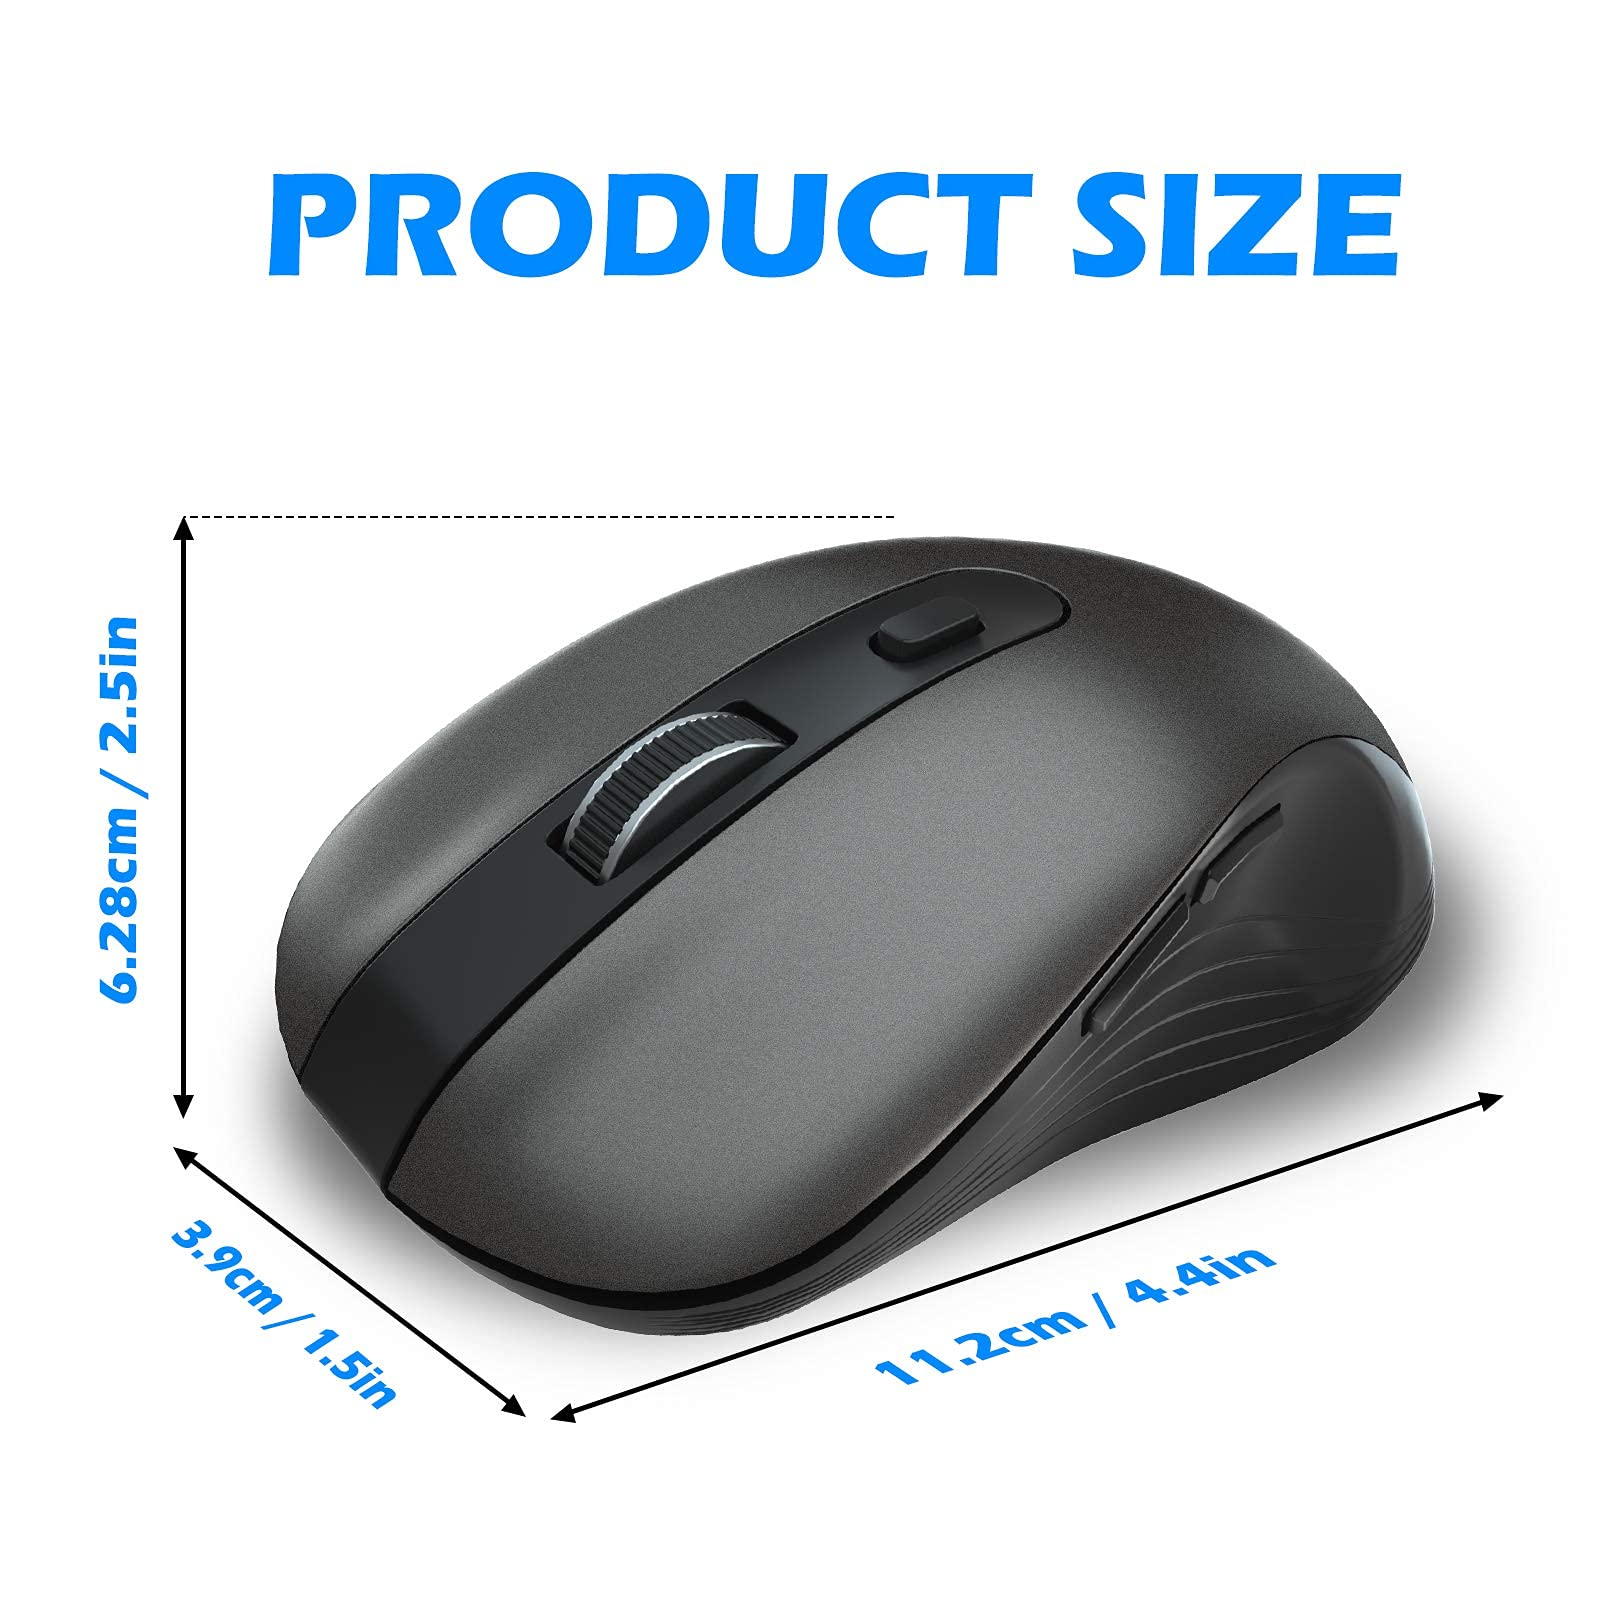 TNBIU Wireless Mouse, 2.4G 4000DPI Ergonomics Cordless Mouse with USB Receiver, Finger Rest, 5 Adjustable DPI Levels, Mobile USB Mice for Chromebook Notebook MacBook Laptop Computer